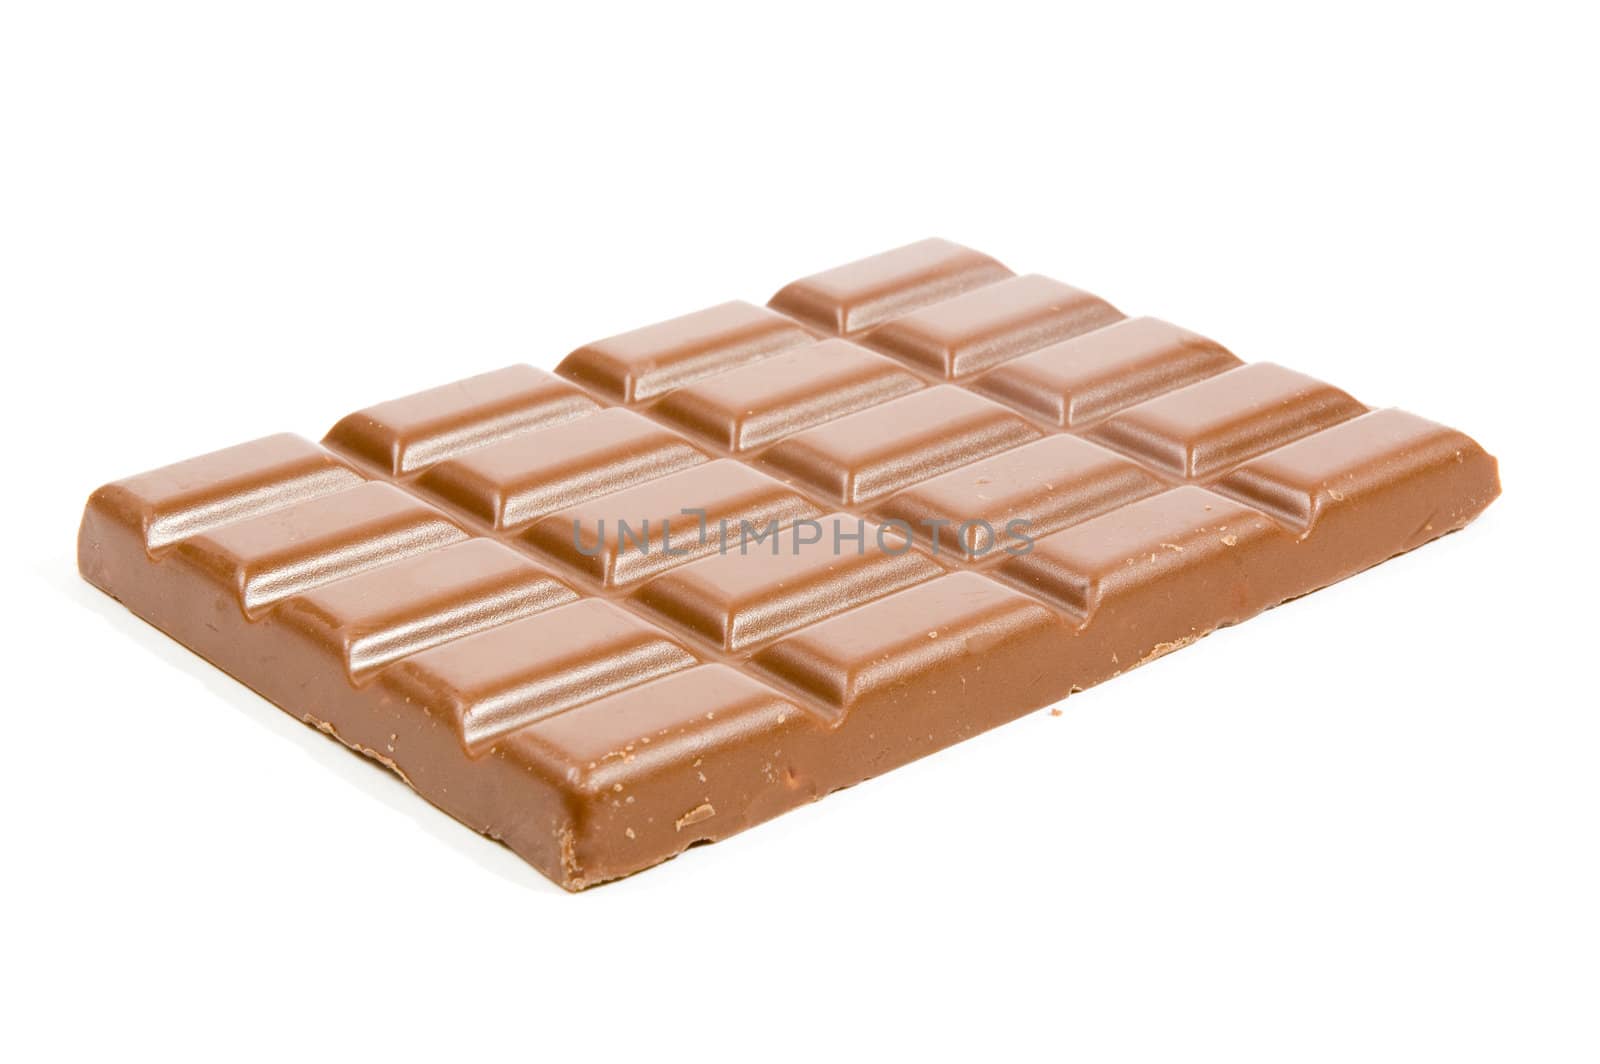 A chocolate bar isolated on white background